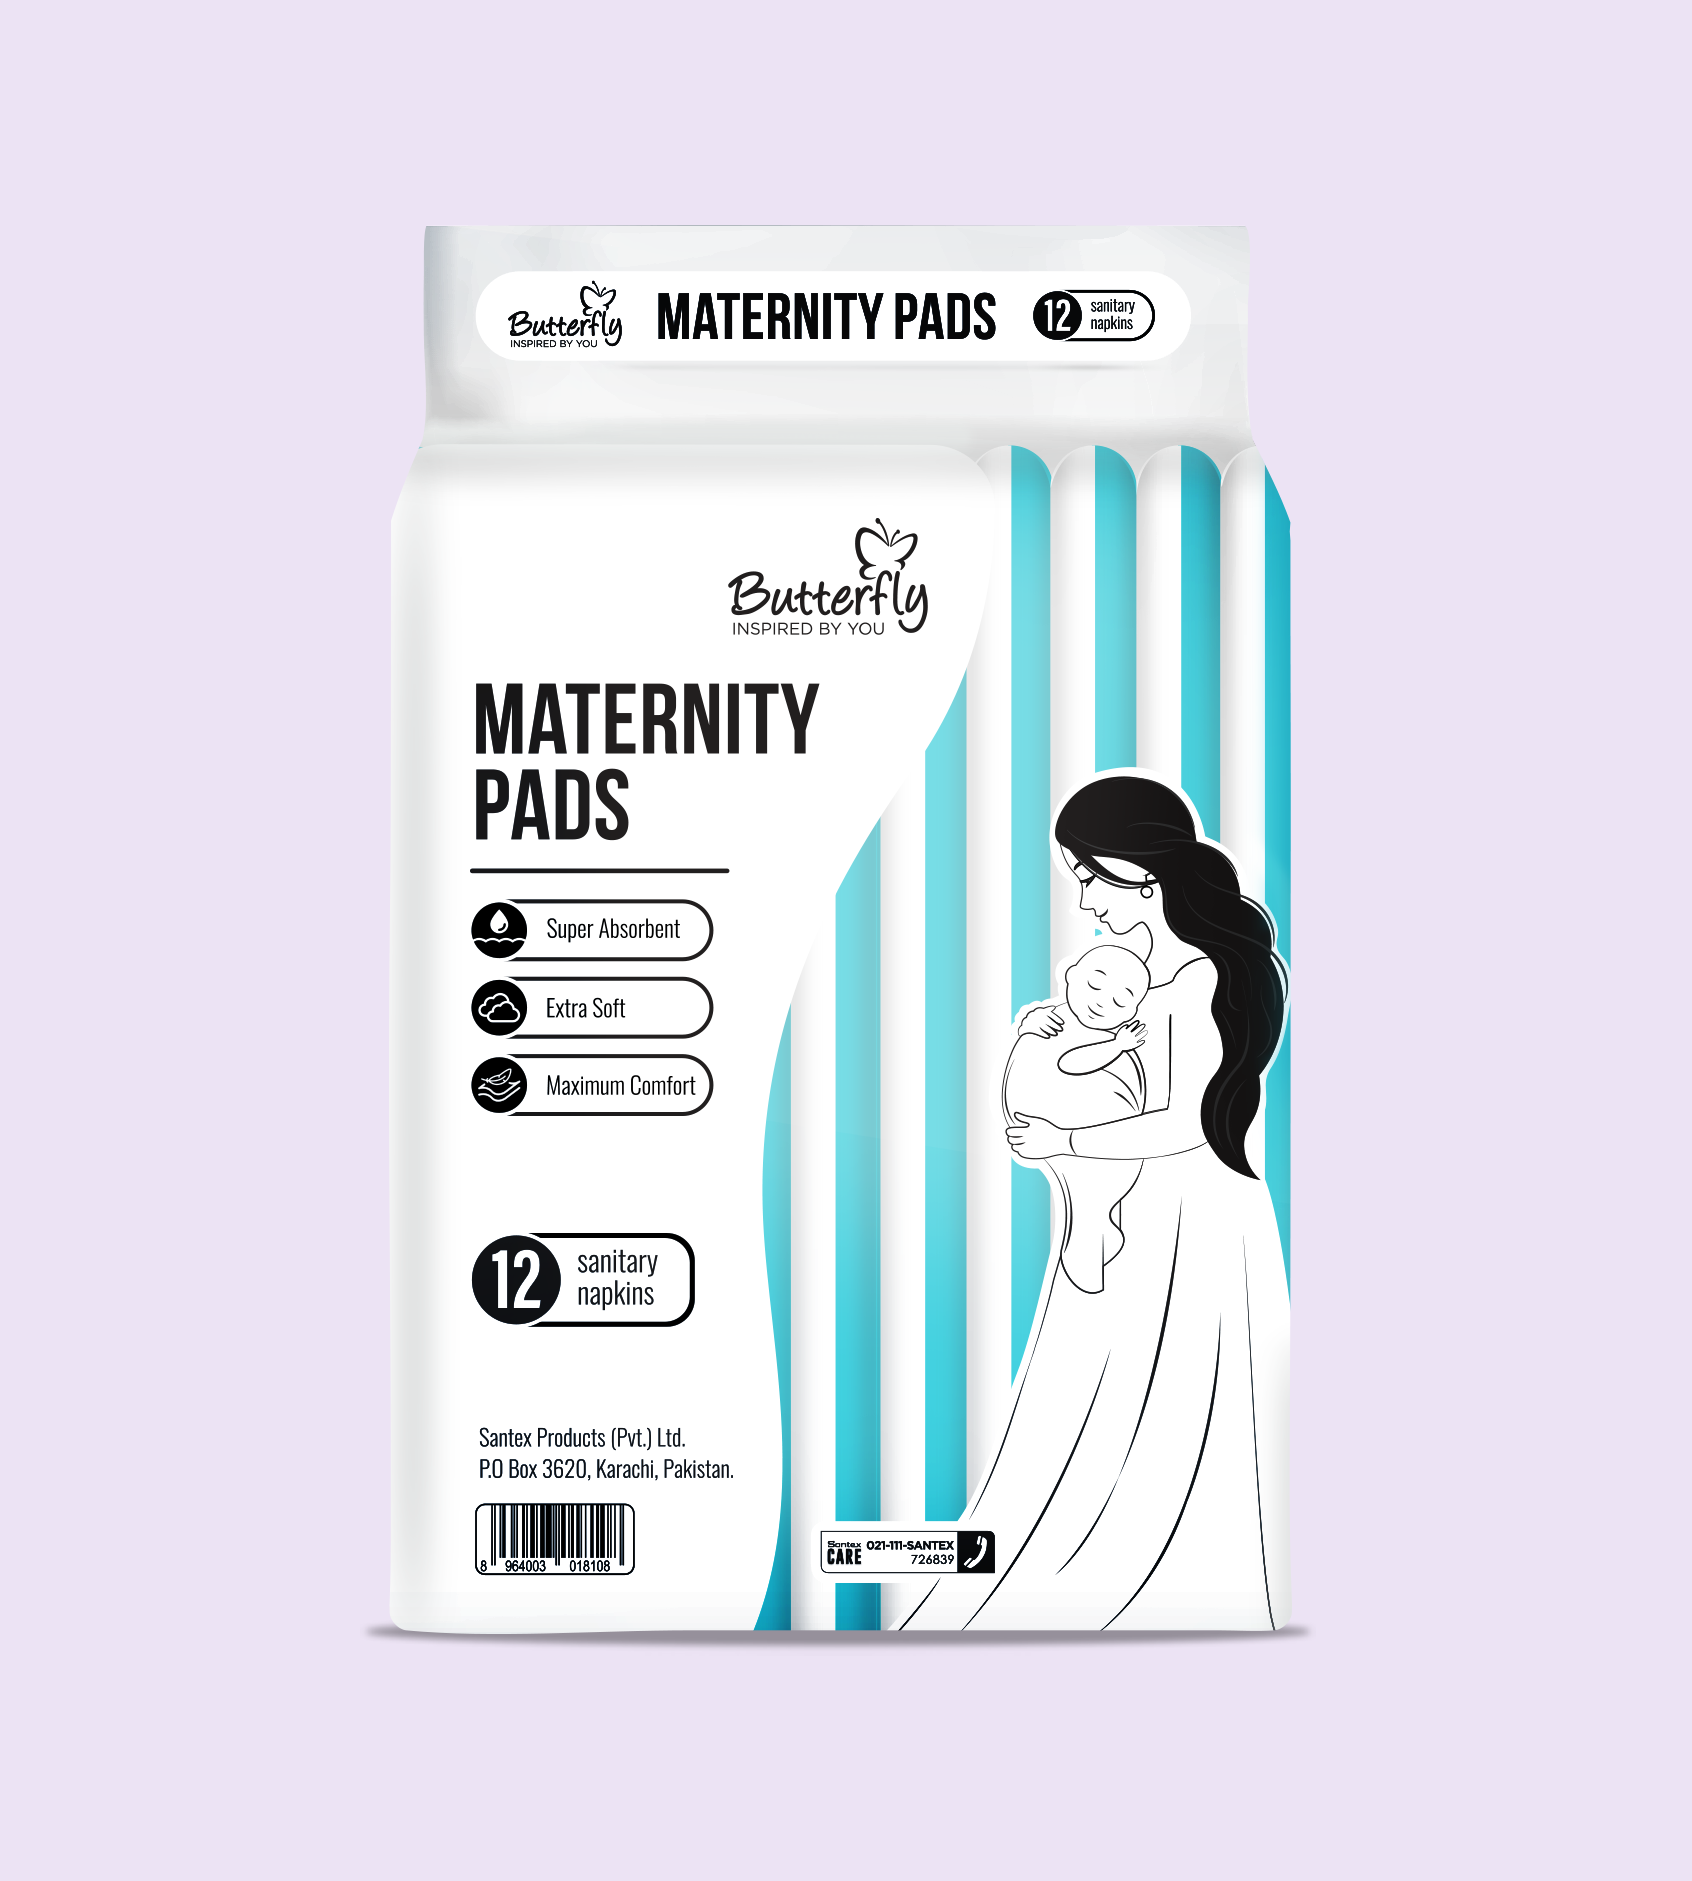 Maternity Pads for women in Pakistan